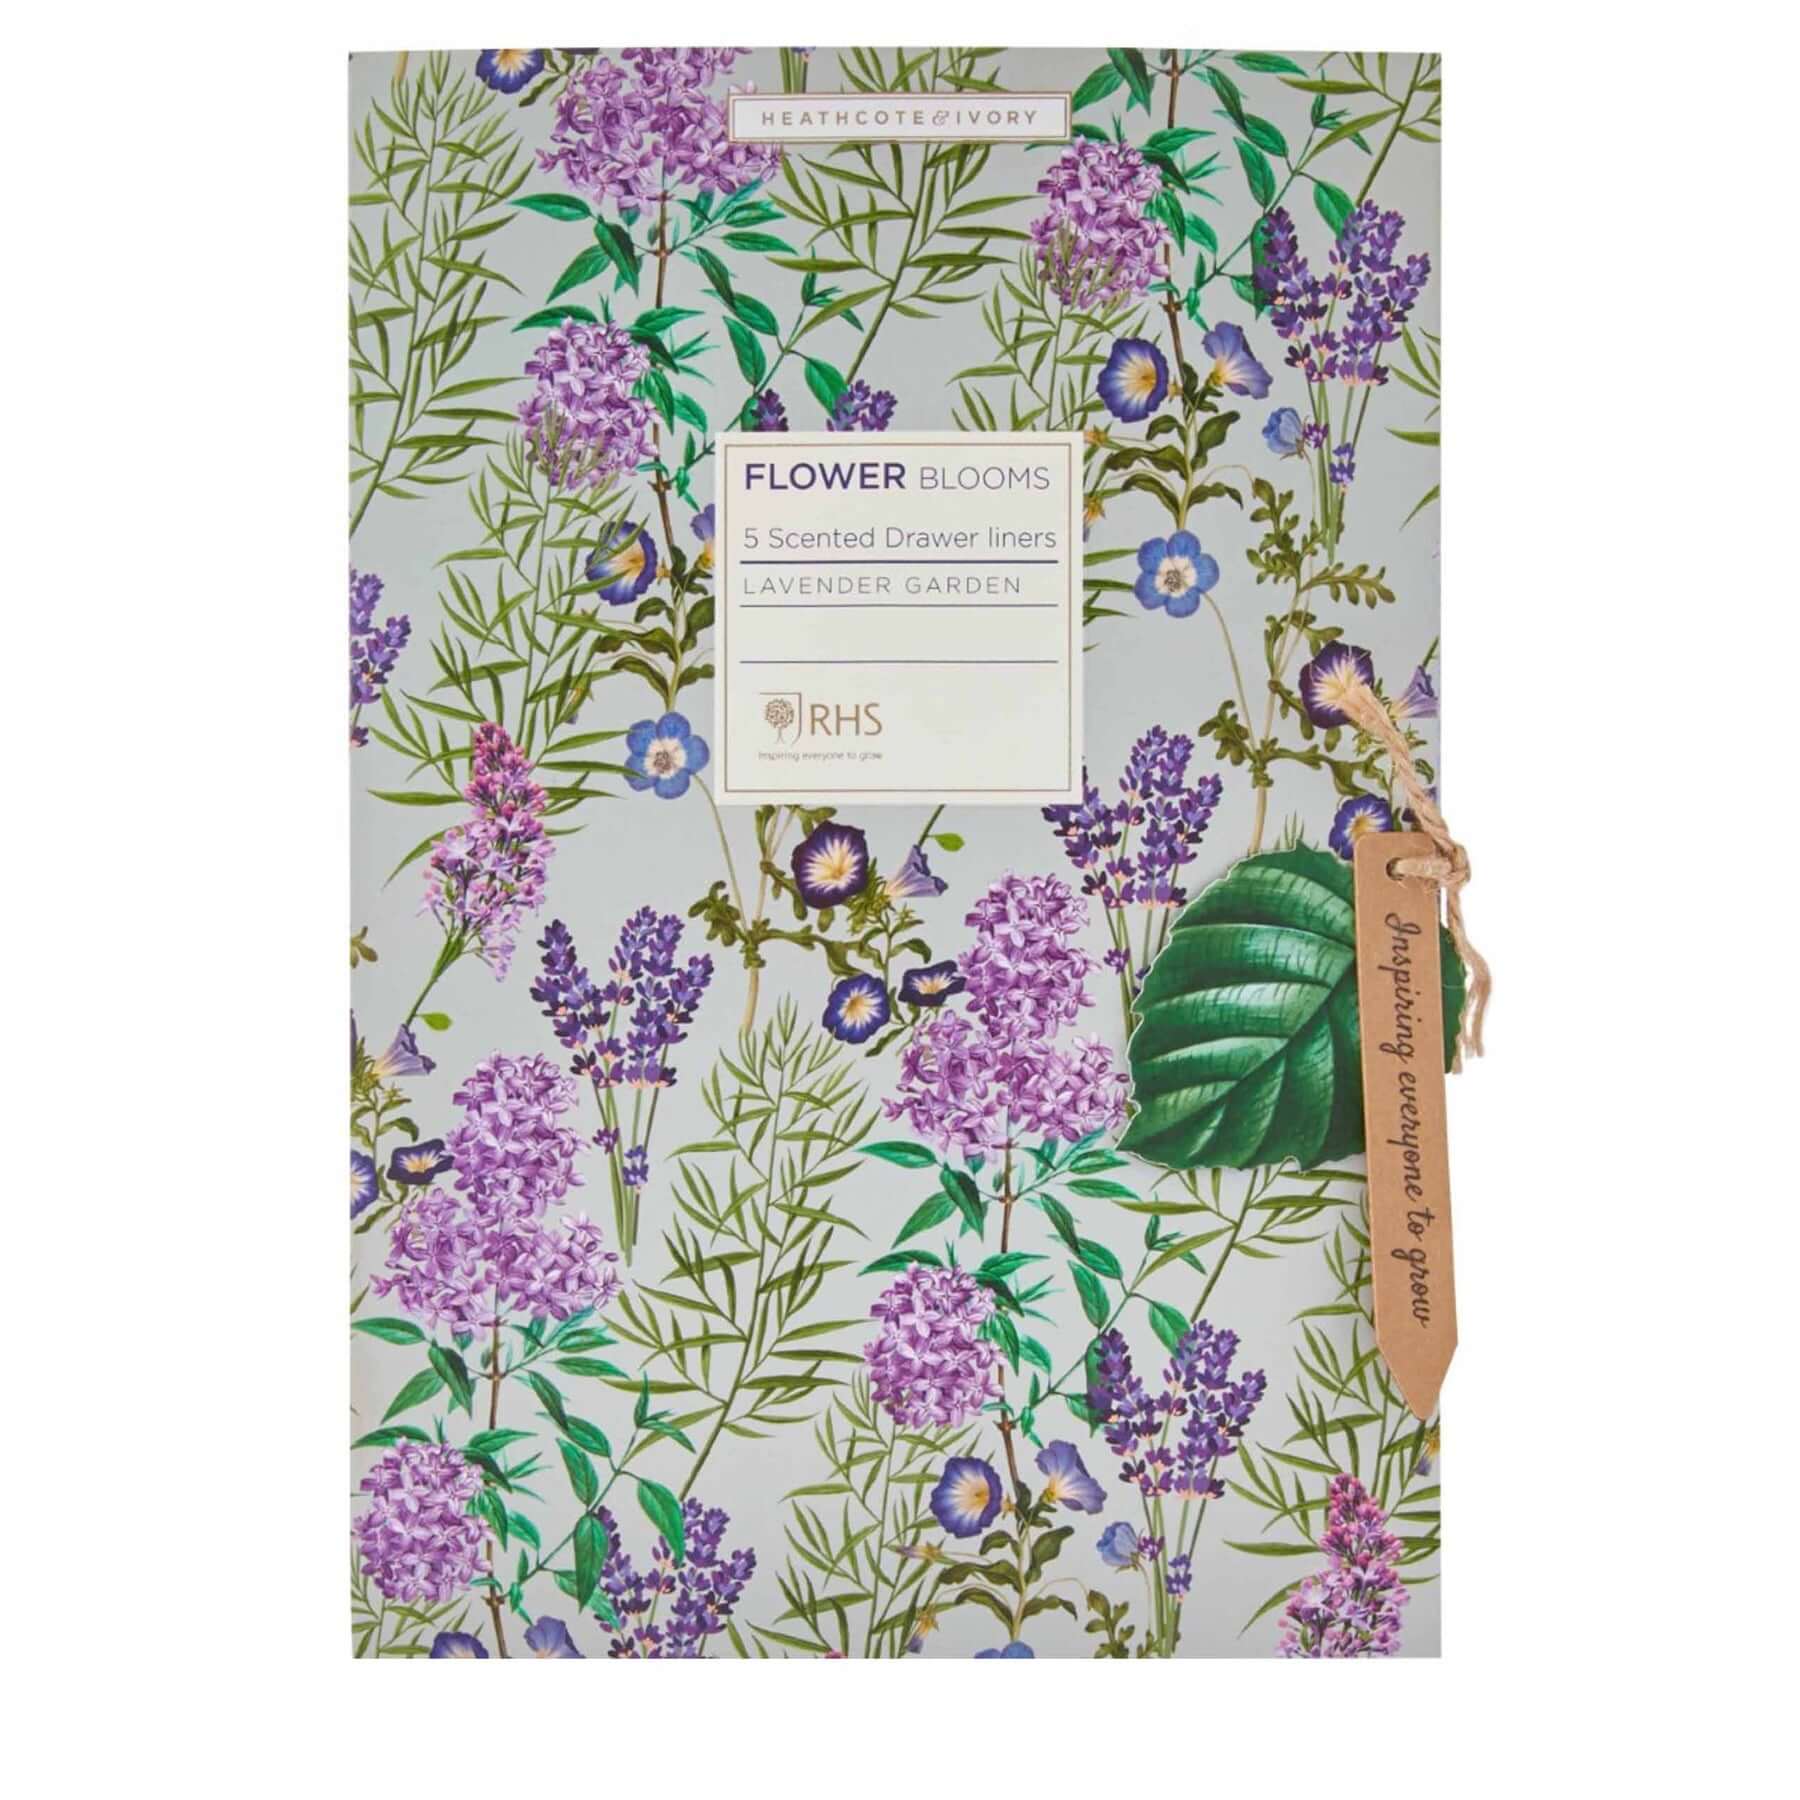 Heathcote & Ivory RHS Lavender Garden Scented Drawer Liners